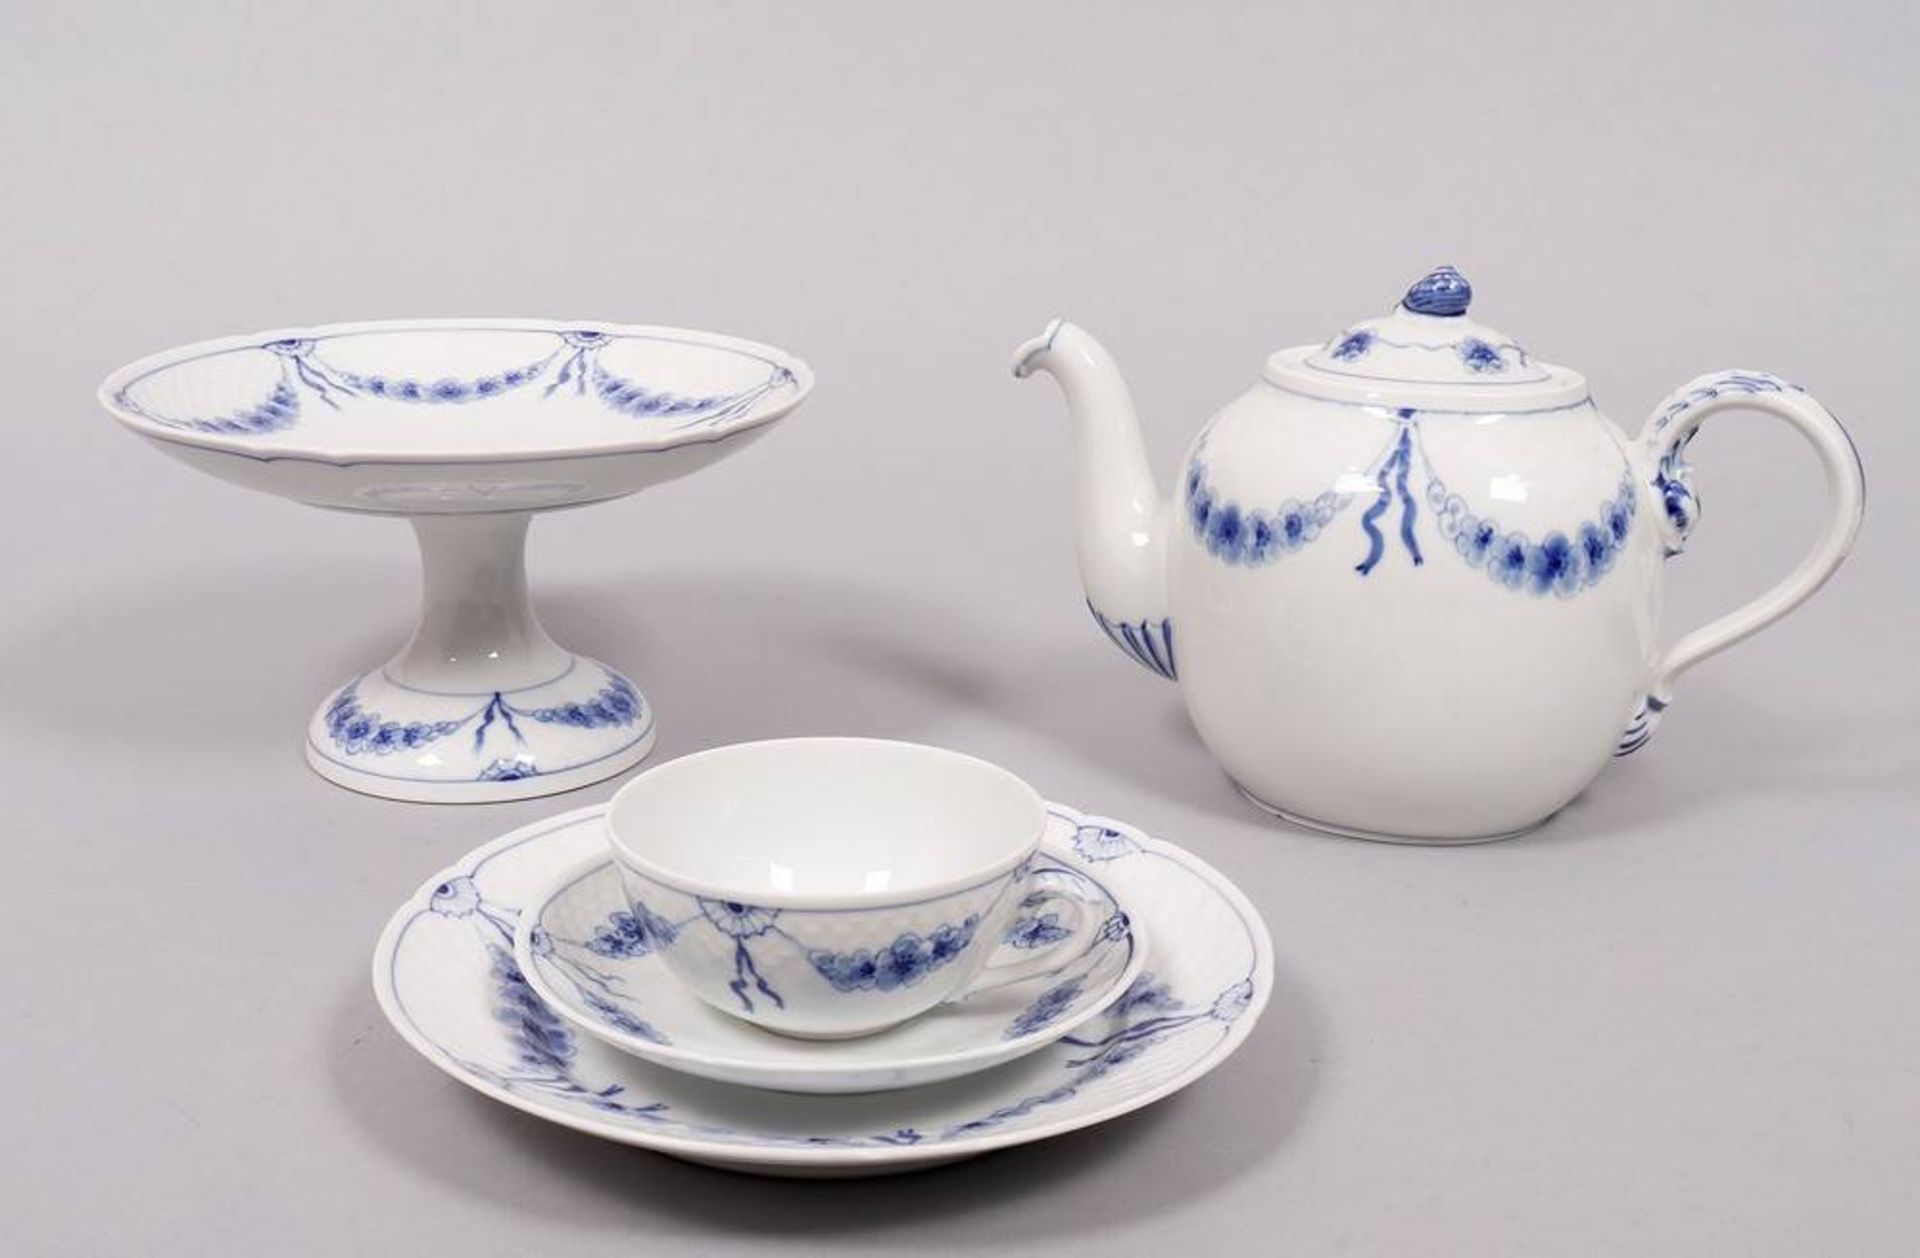 Tea service for 6 persons, Bing & Grondahl, shape and decor "Empire blue and white", 20th C. - Image 5 of 6